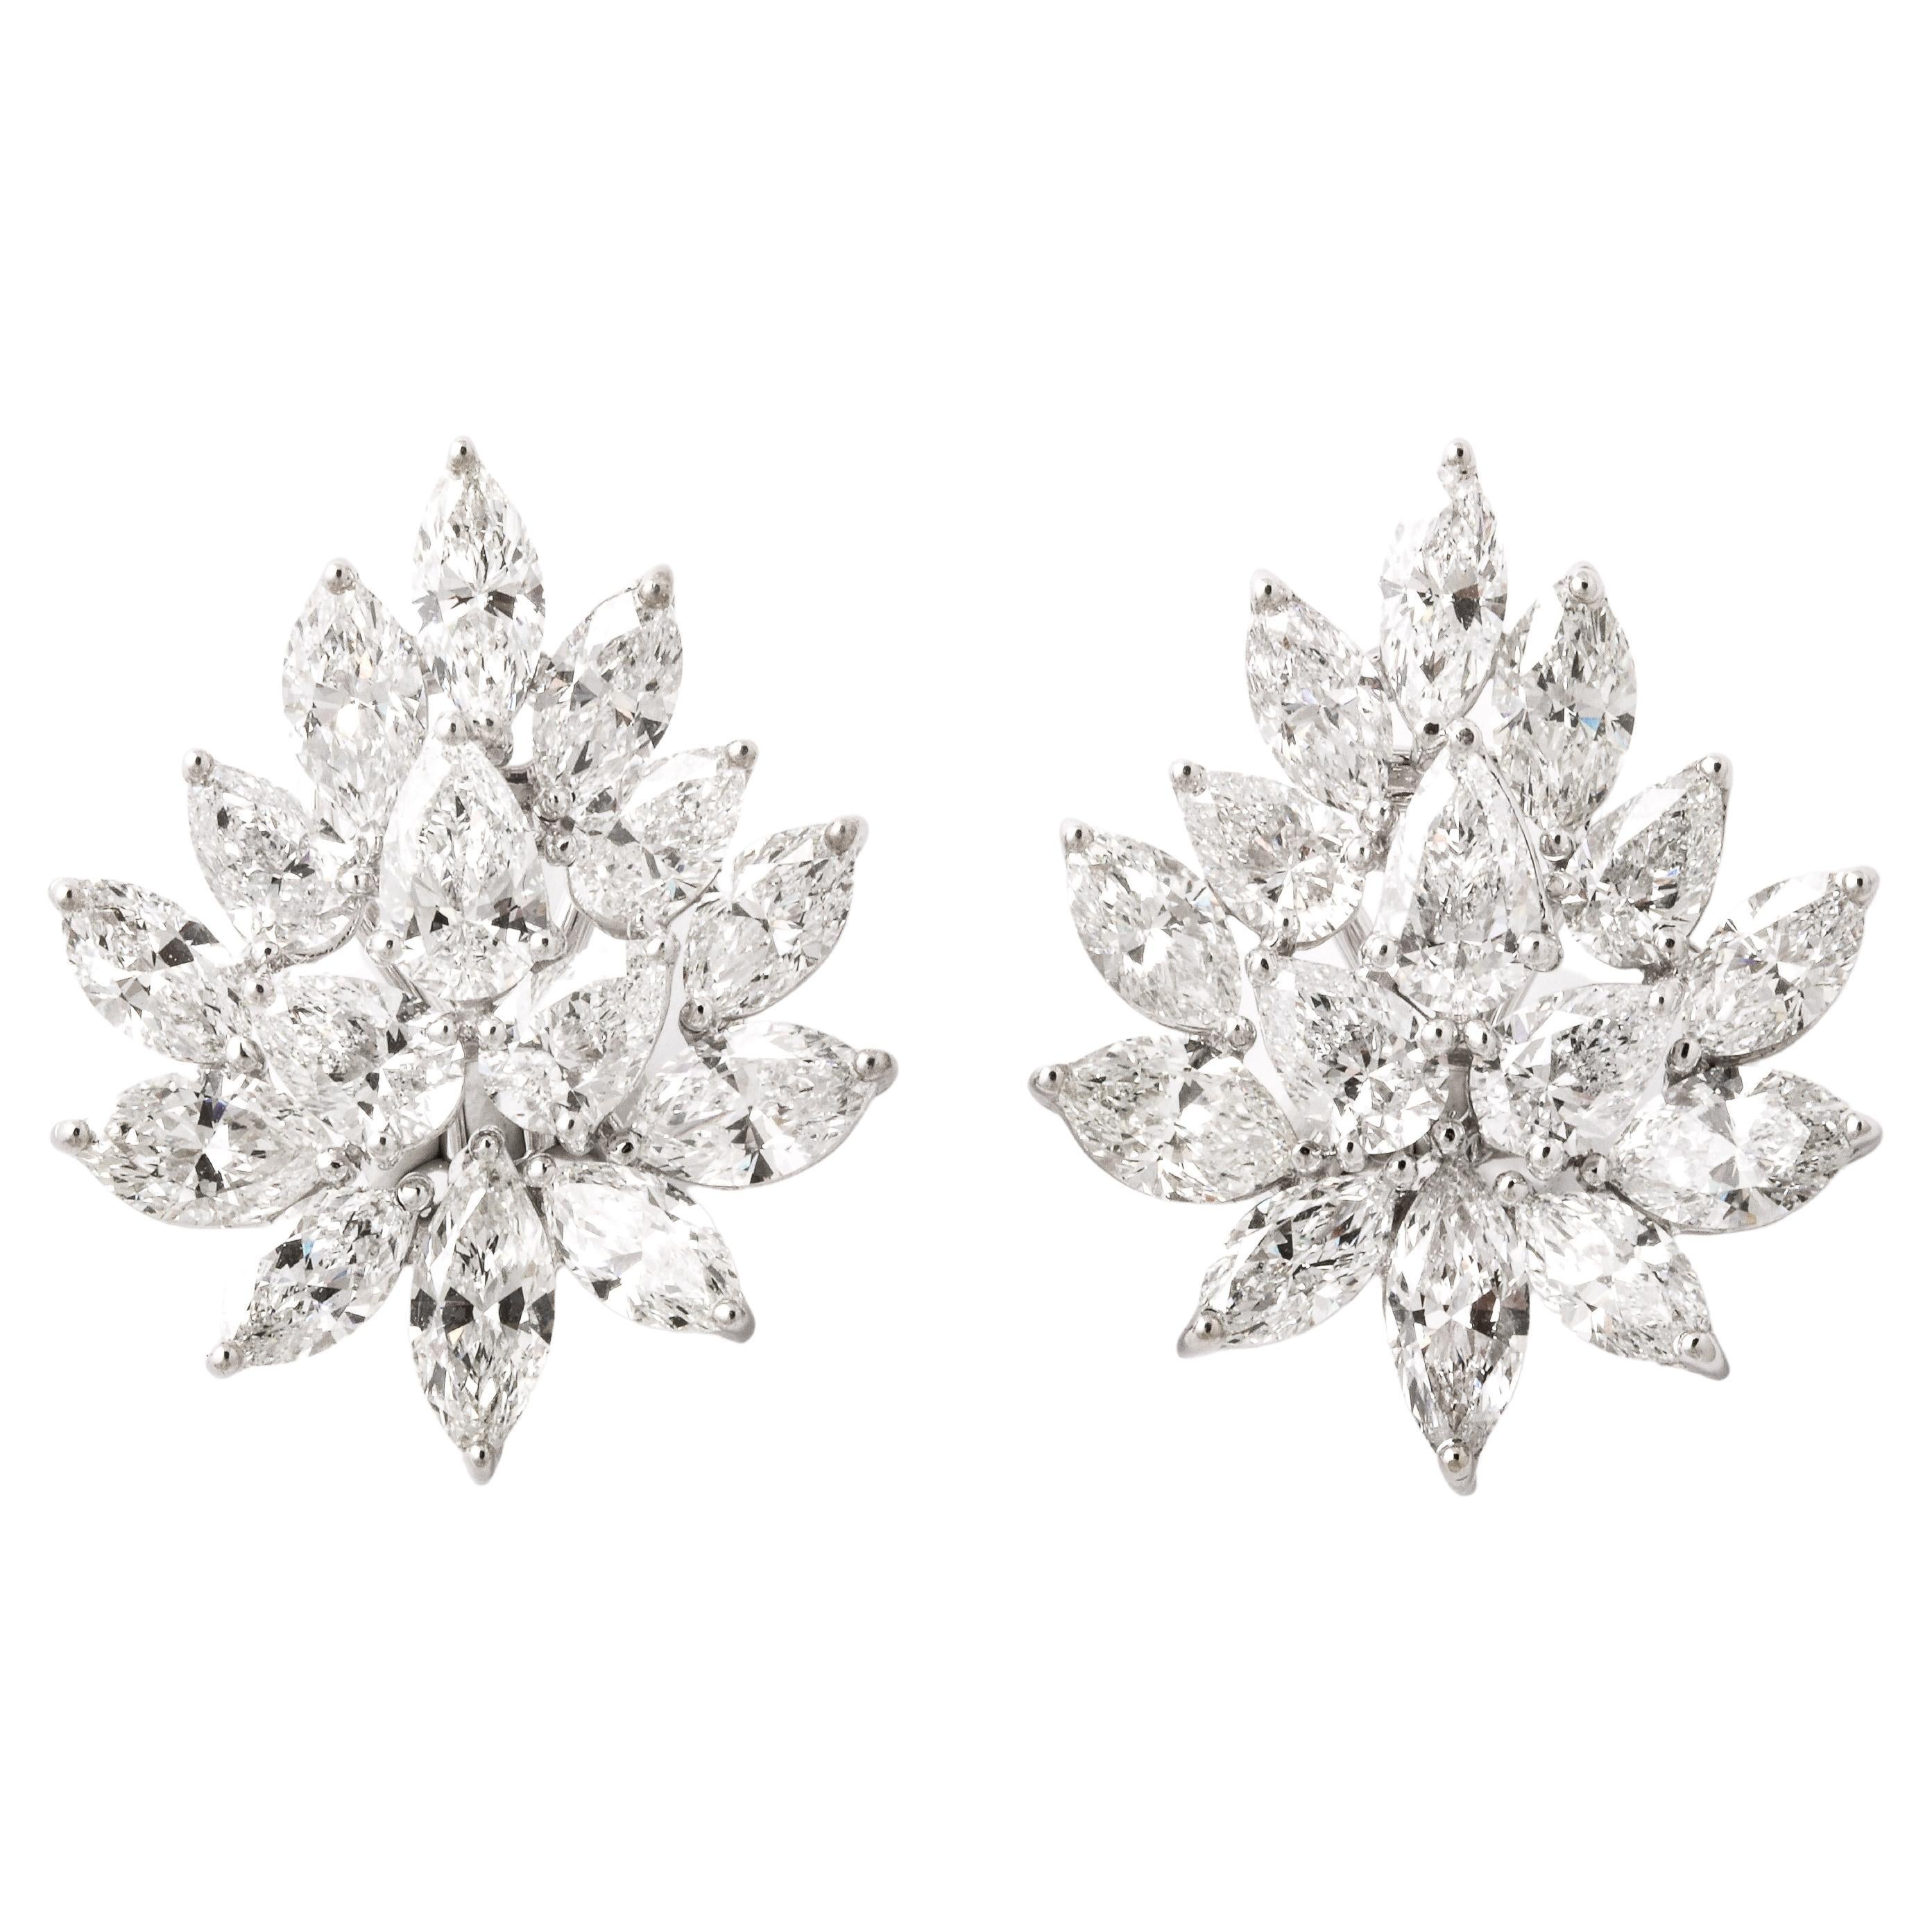 Pave Diamond Cluster Earrings For Sale at 1stDibs